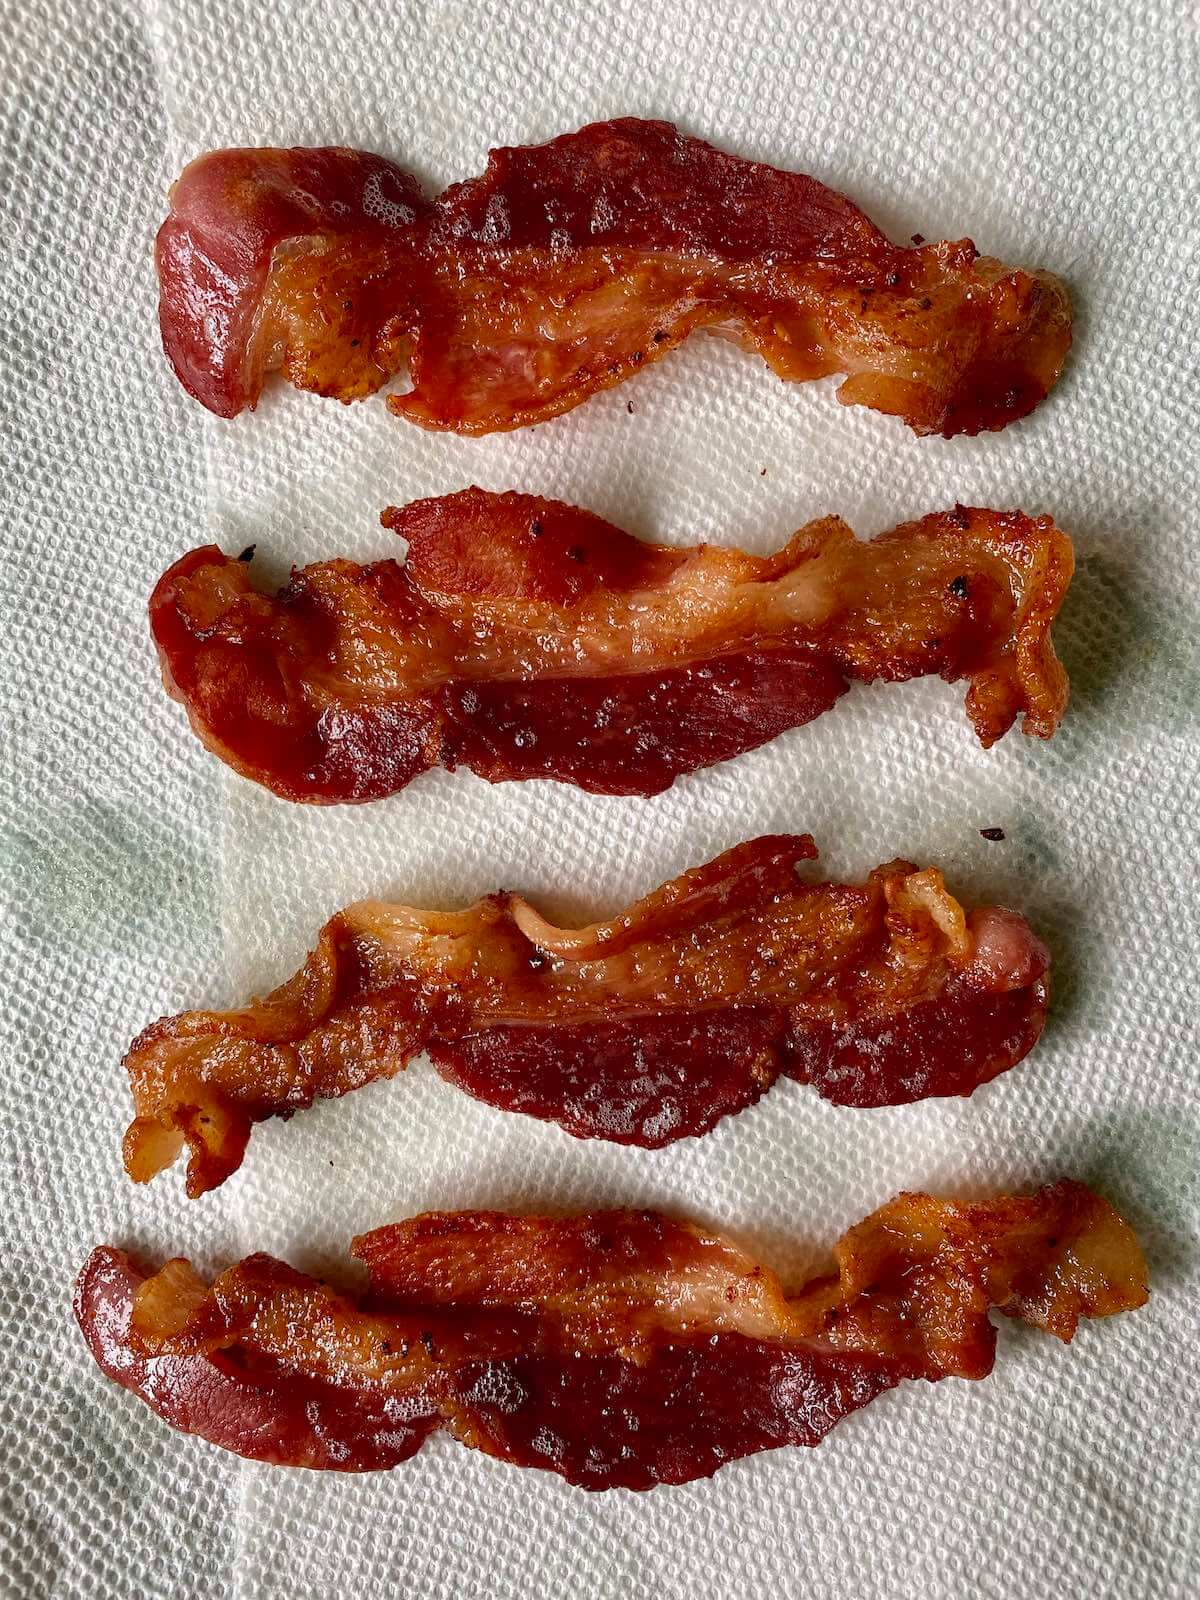 Four cooked strips of bacon draining on a paper towel.